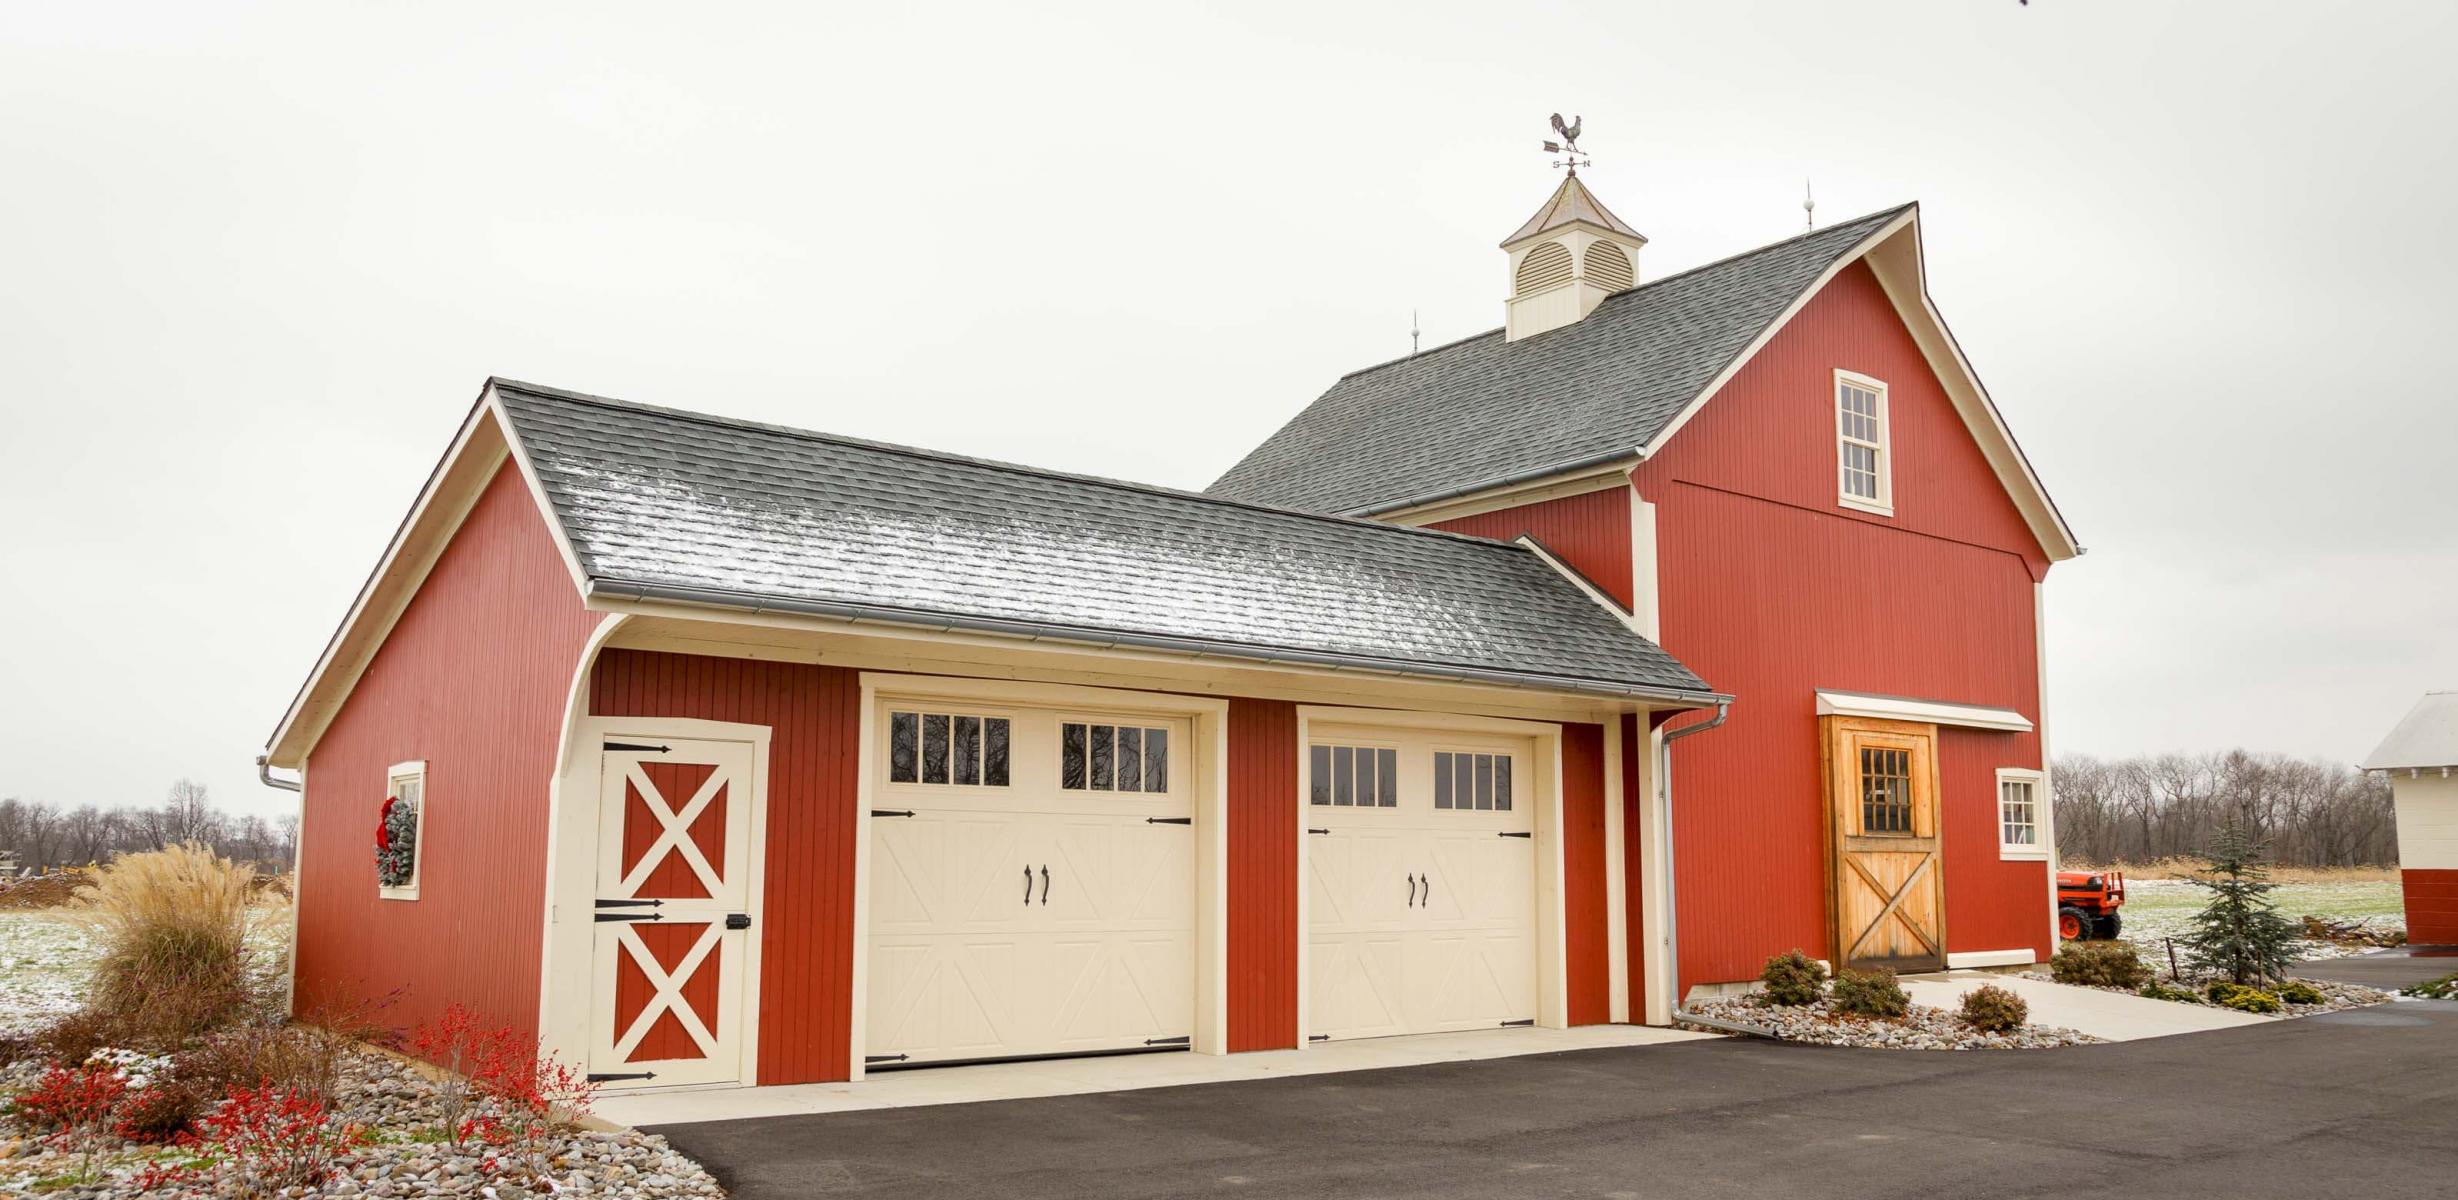 Restored barn with attached garage.